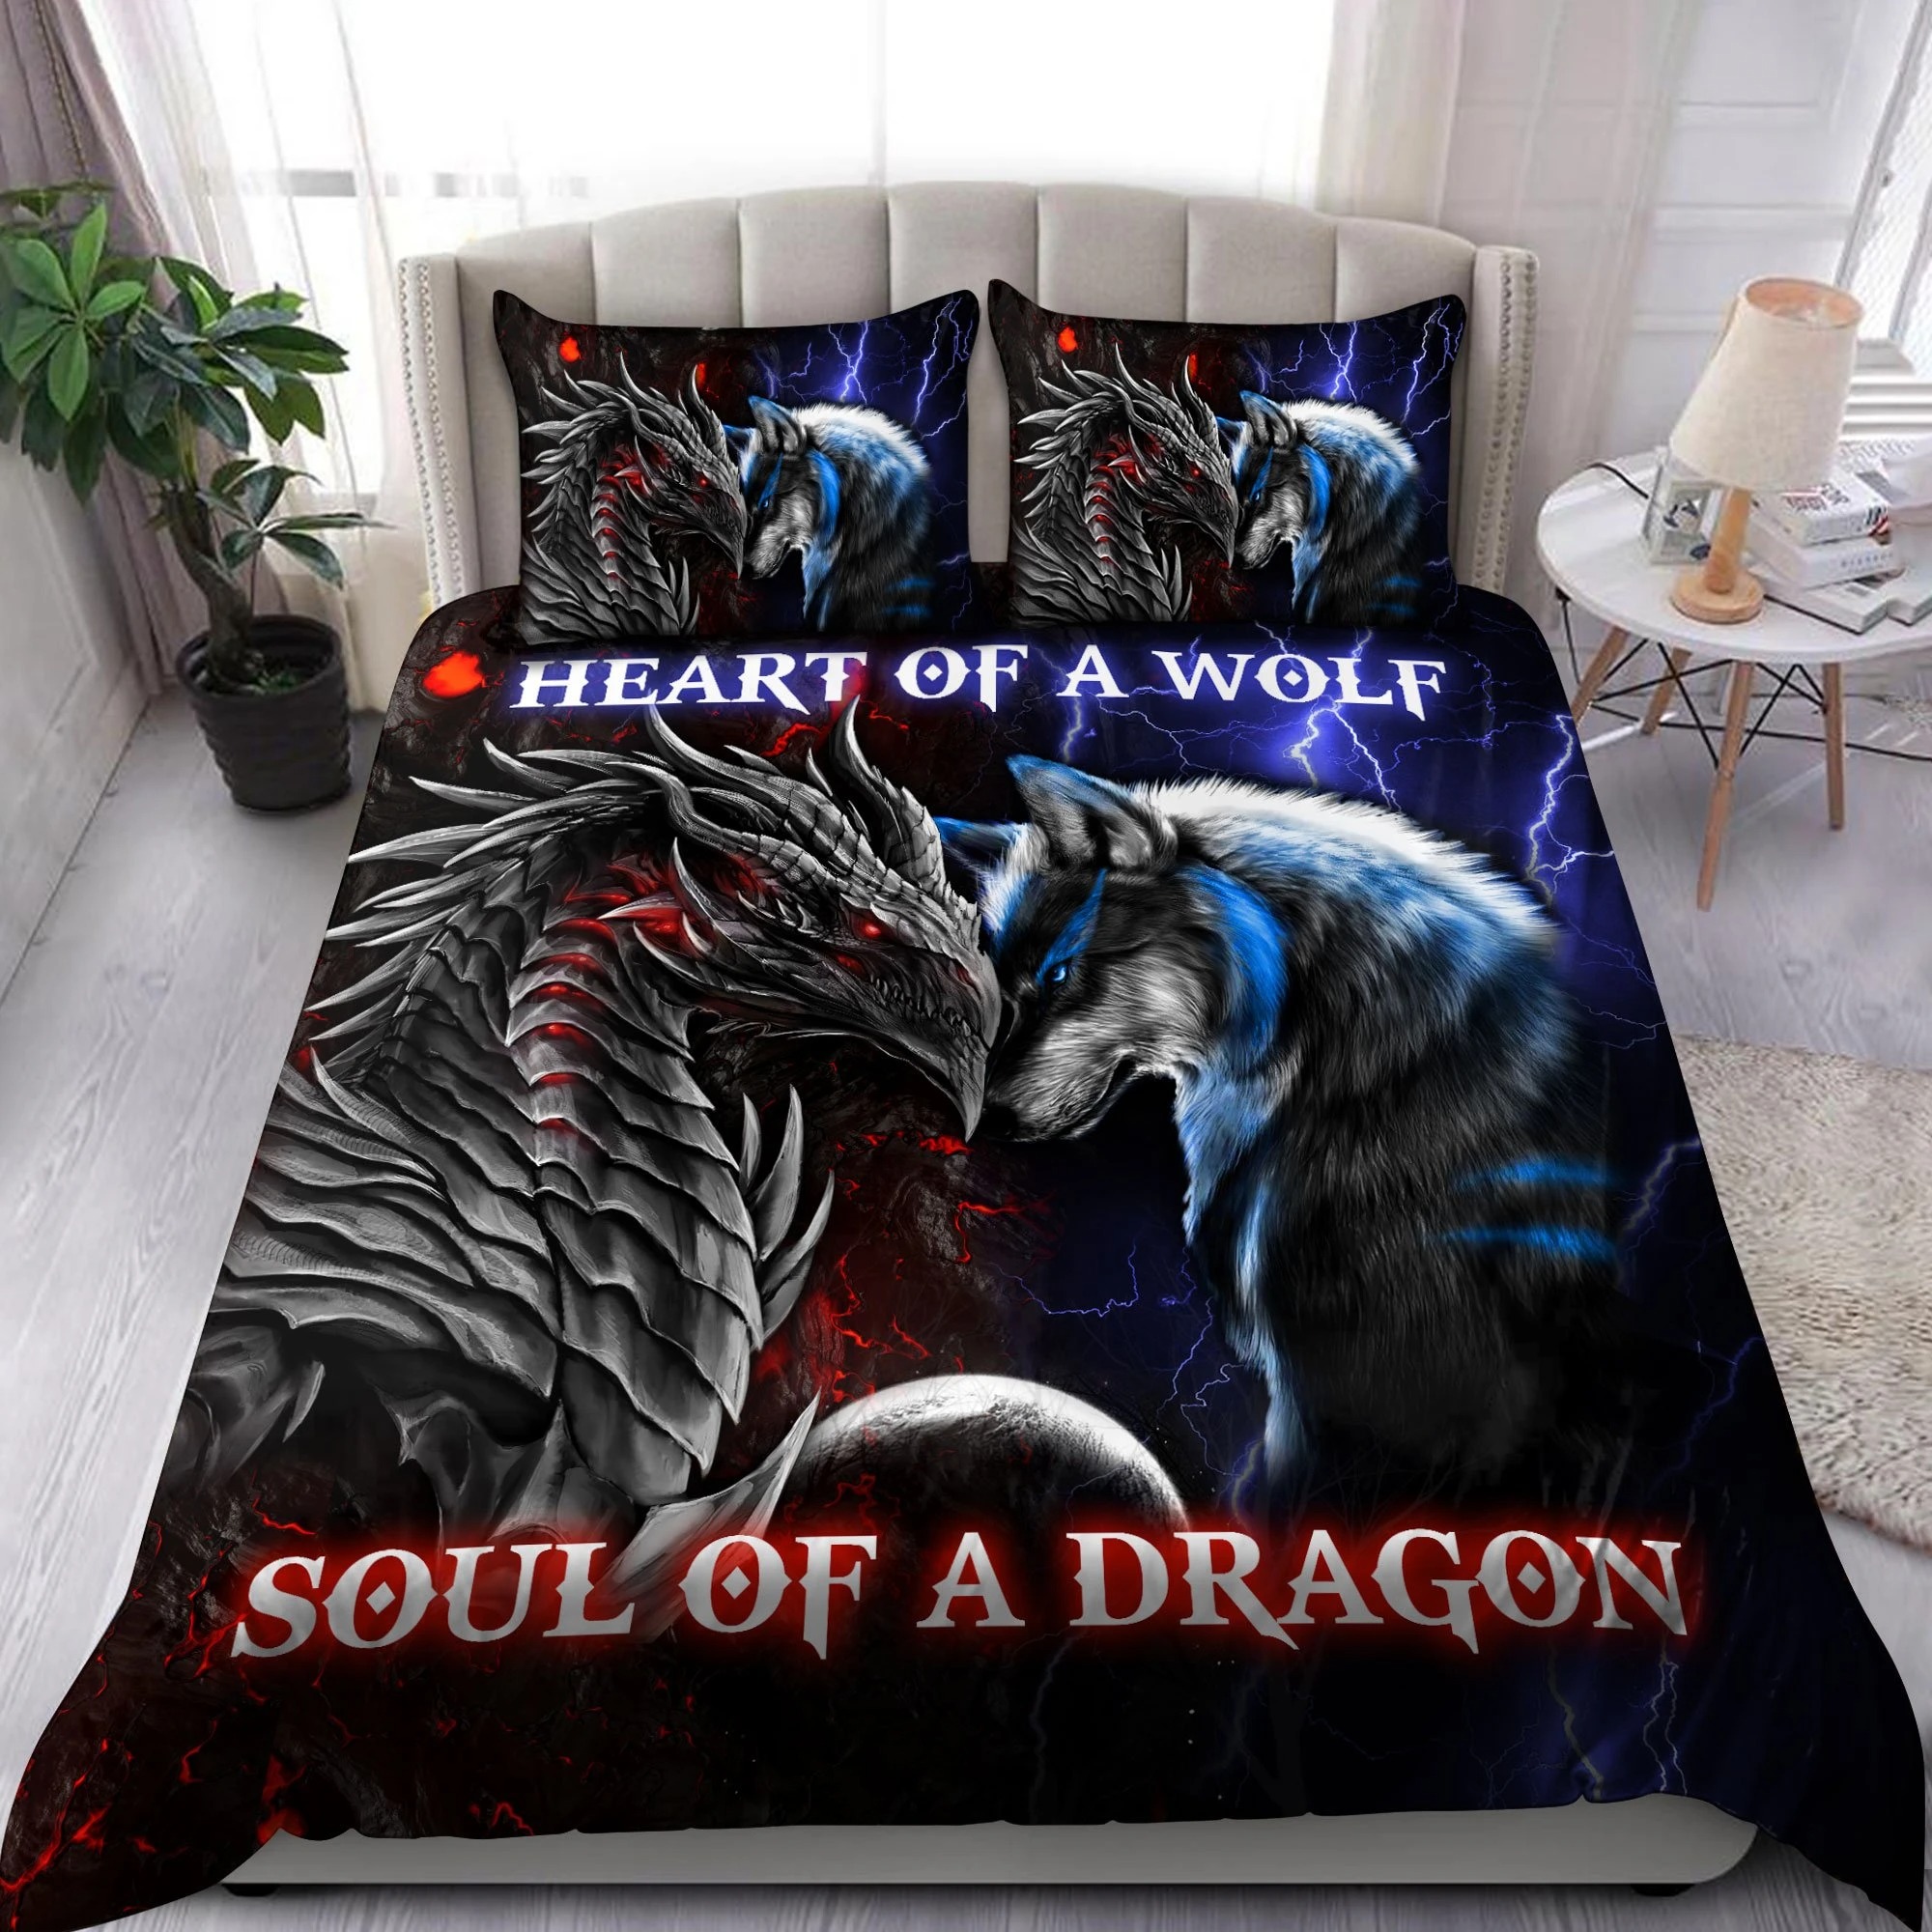 Heart of a wolf soul of a dragon bedding set3